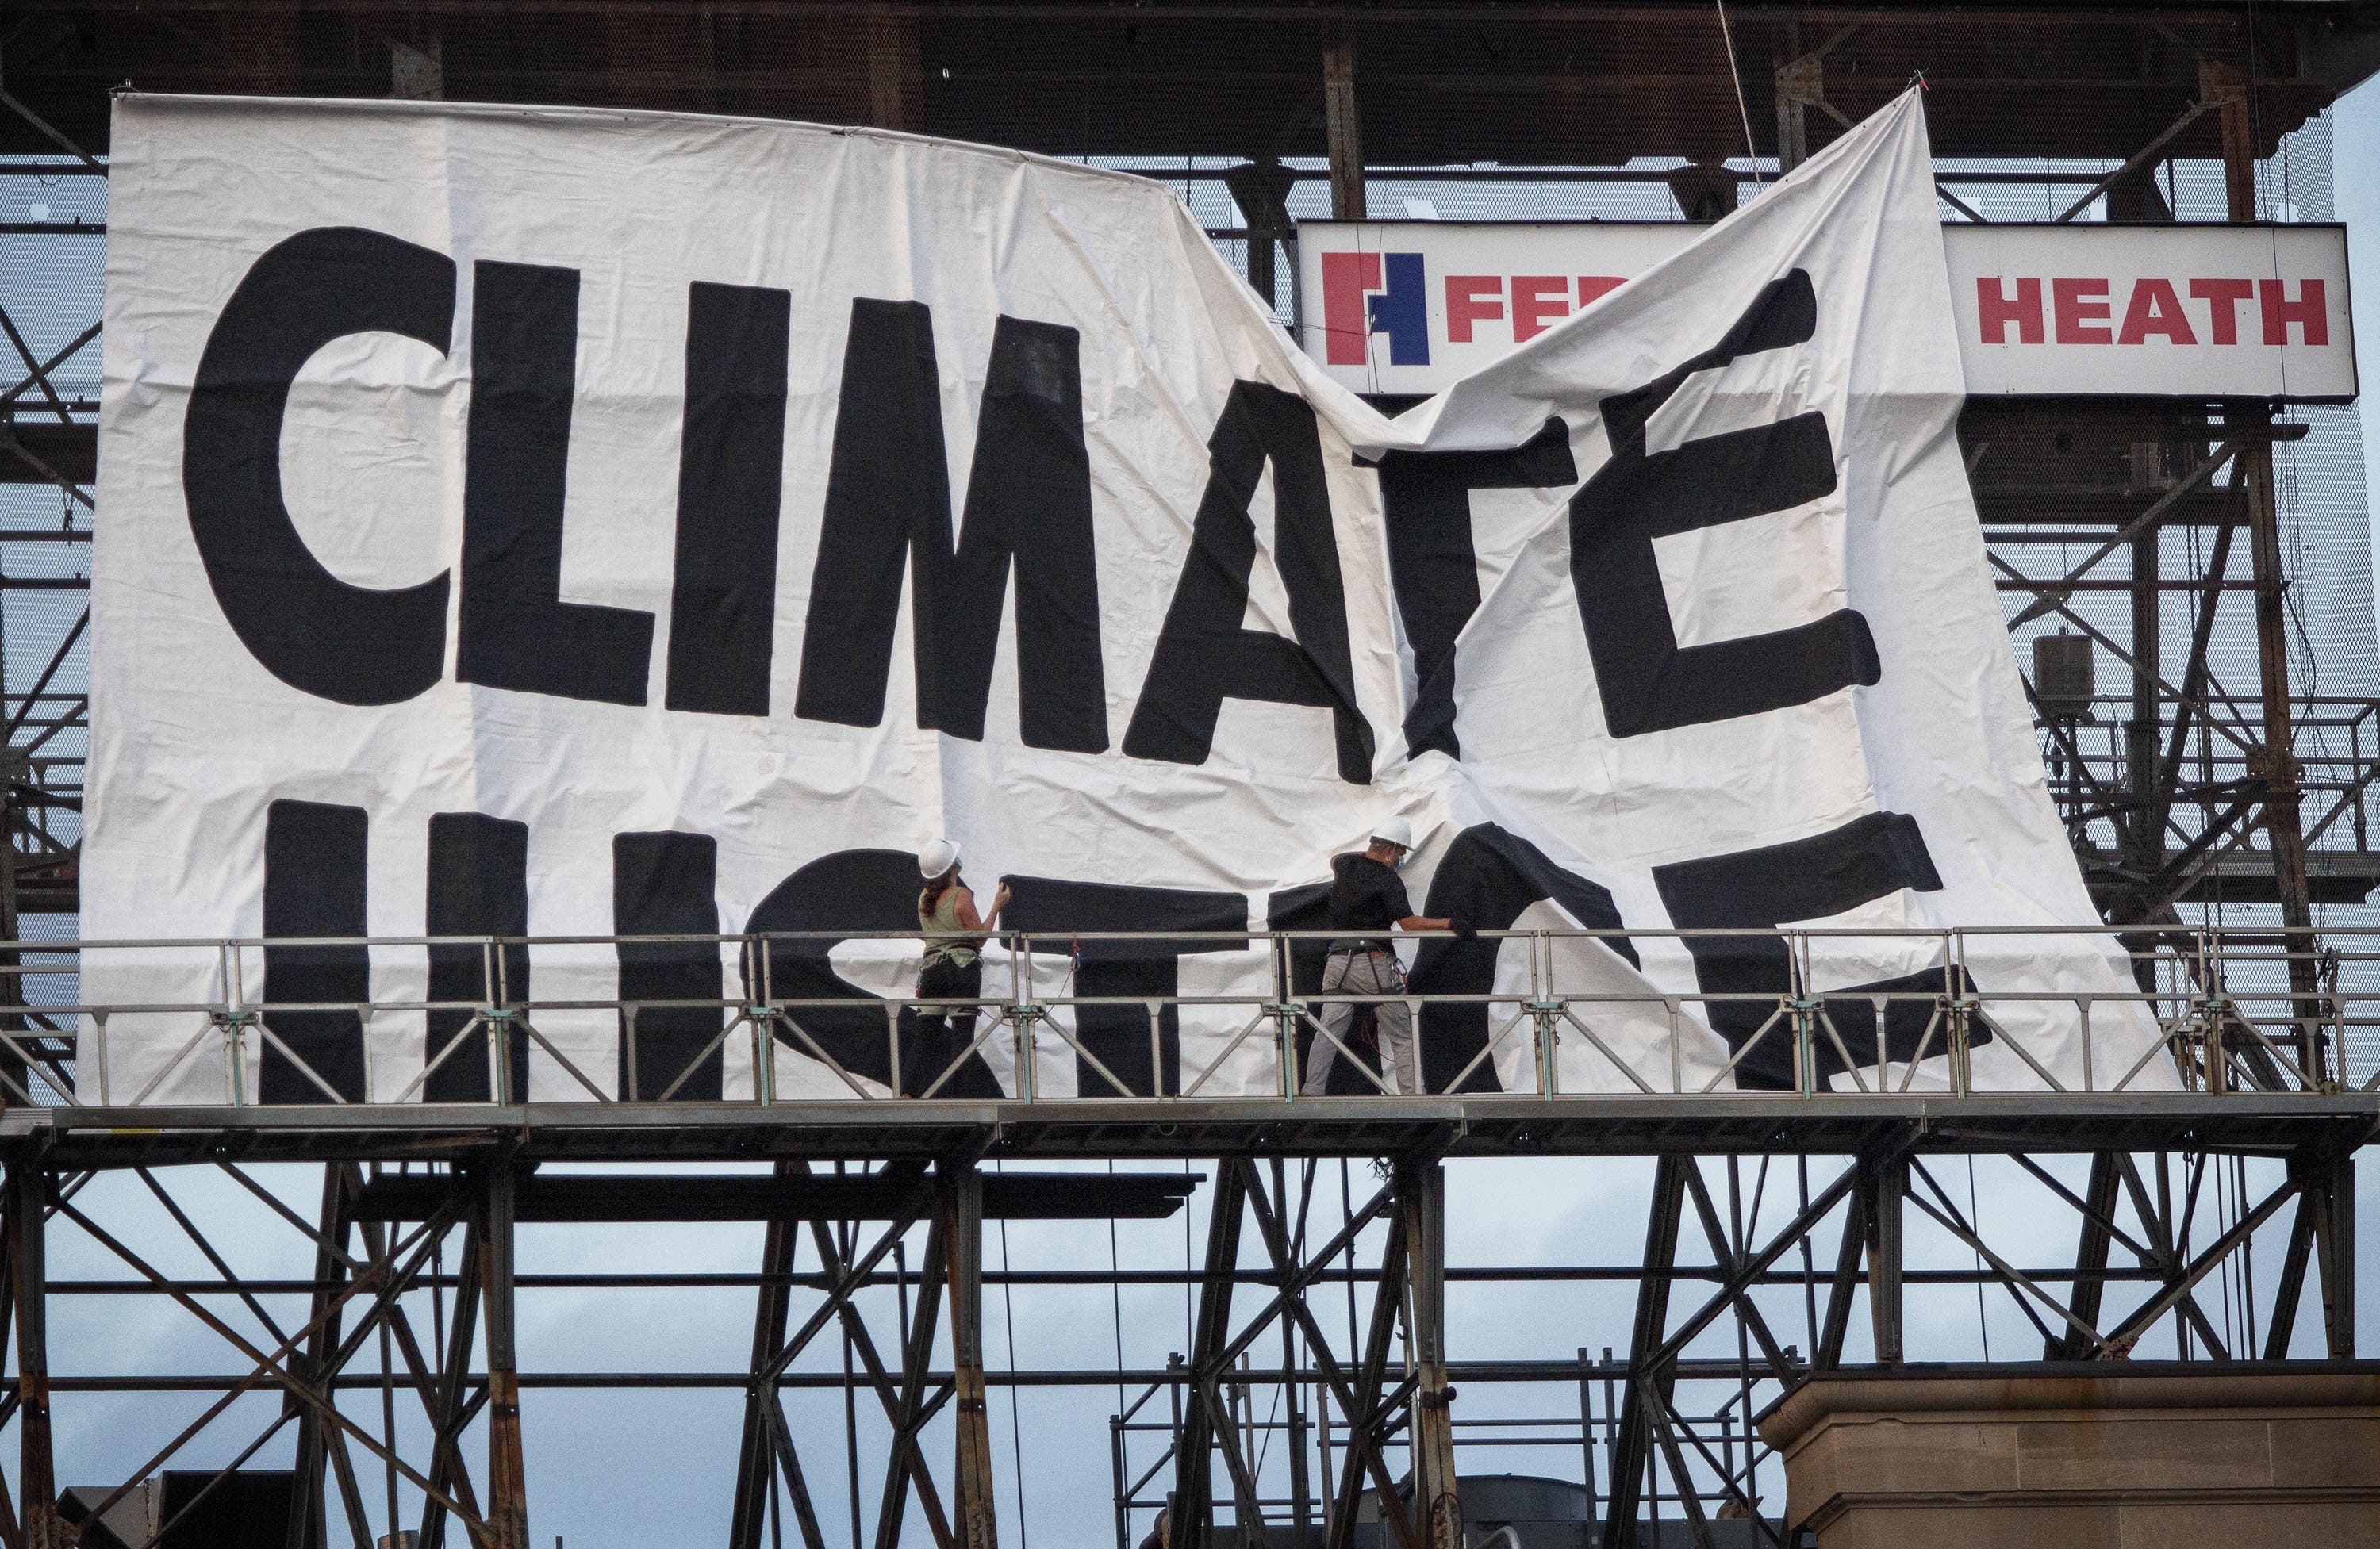 As the evening Red Sox game is about to begin, activists from Extinction Rebellion start to raise a banner on the Citgo sign in Kenmore Square, Boston. (Robin Lubbock/WBUR)